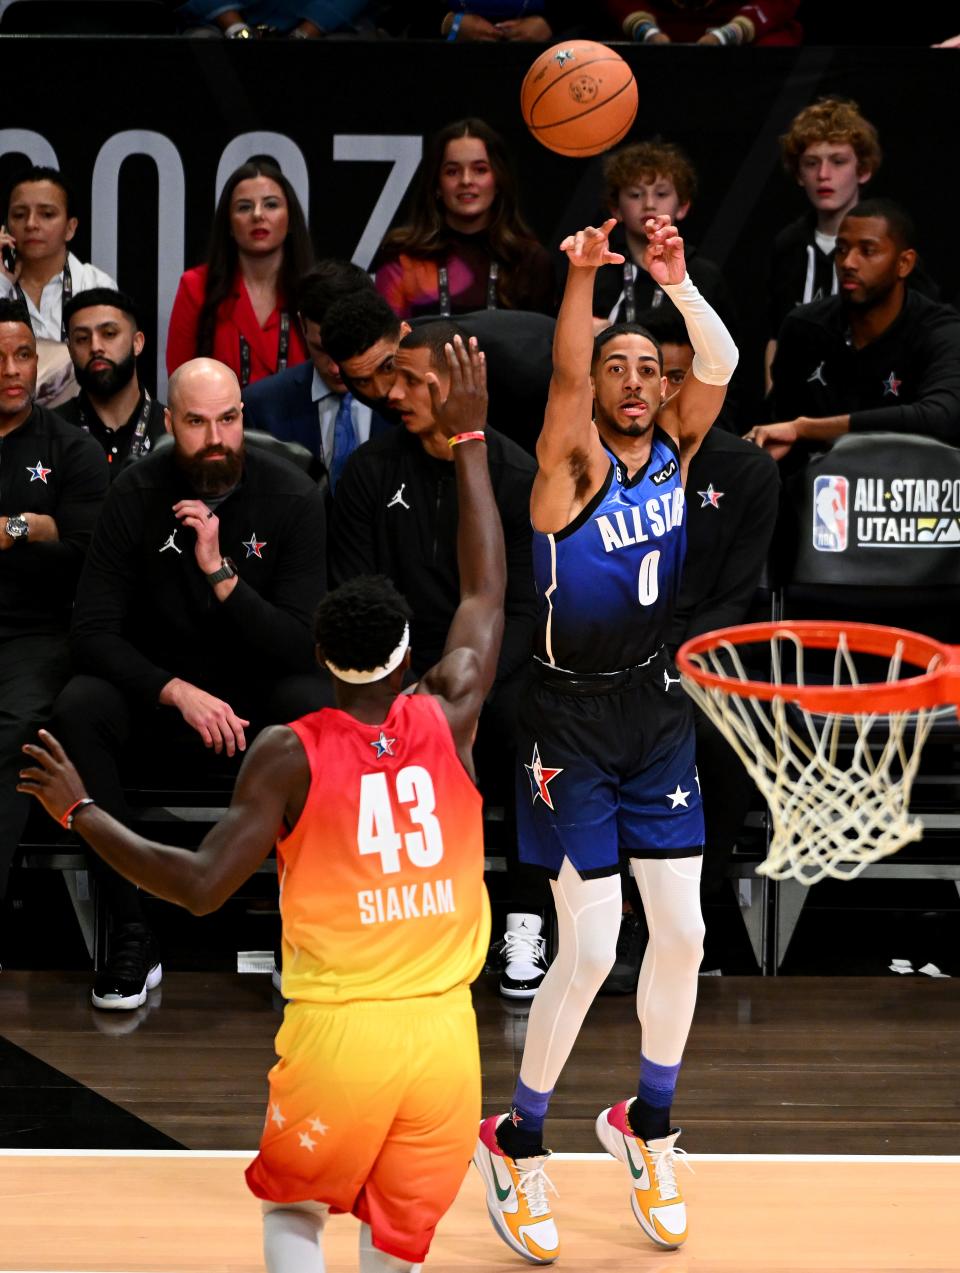 SALT LAKE CITY, UTAH - FEBRUARY 19: Tyrese Haliburton #0 of the Indiana Pacers shoots against Pascal Siakam #43 of the Toronto Raptors during the second half in the 2023 NBA All Star Game between Team Giannis and Team LeBron at Vivint Arena on February 19, 2023 in Salt Lake City, Utah.